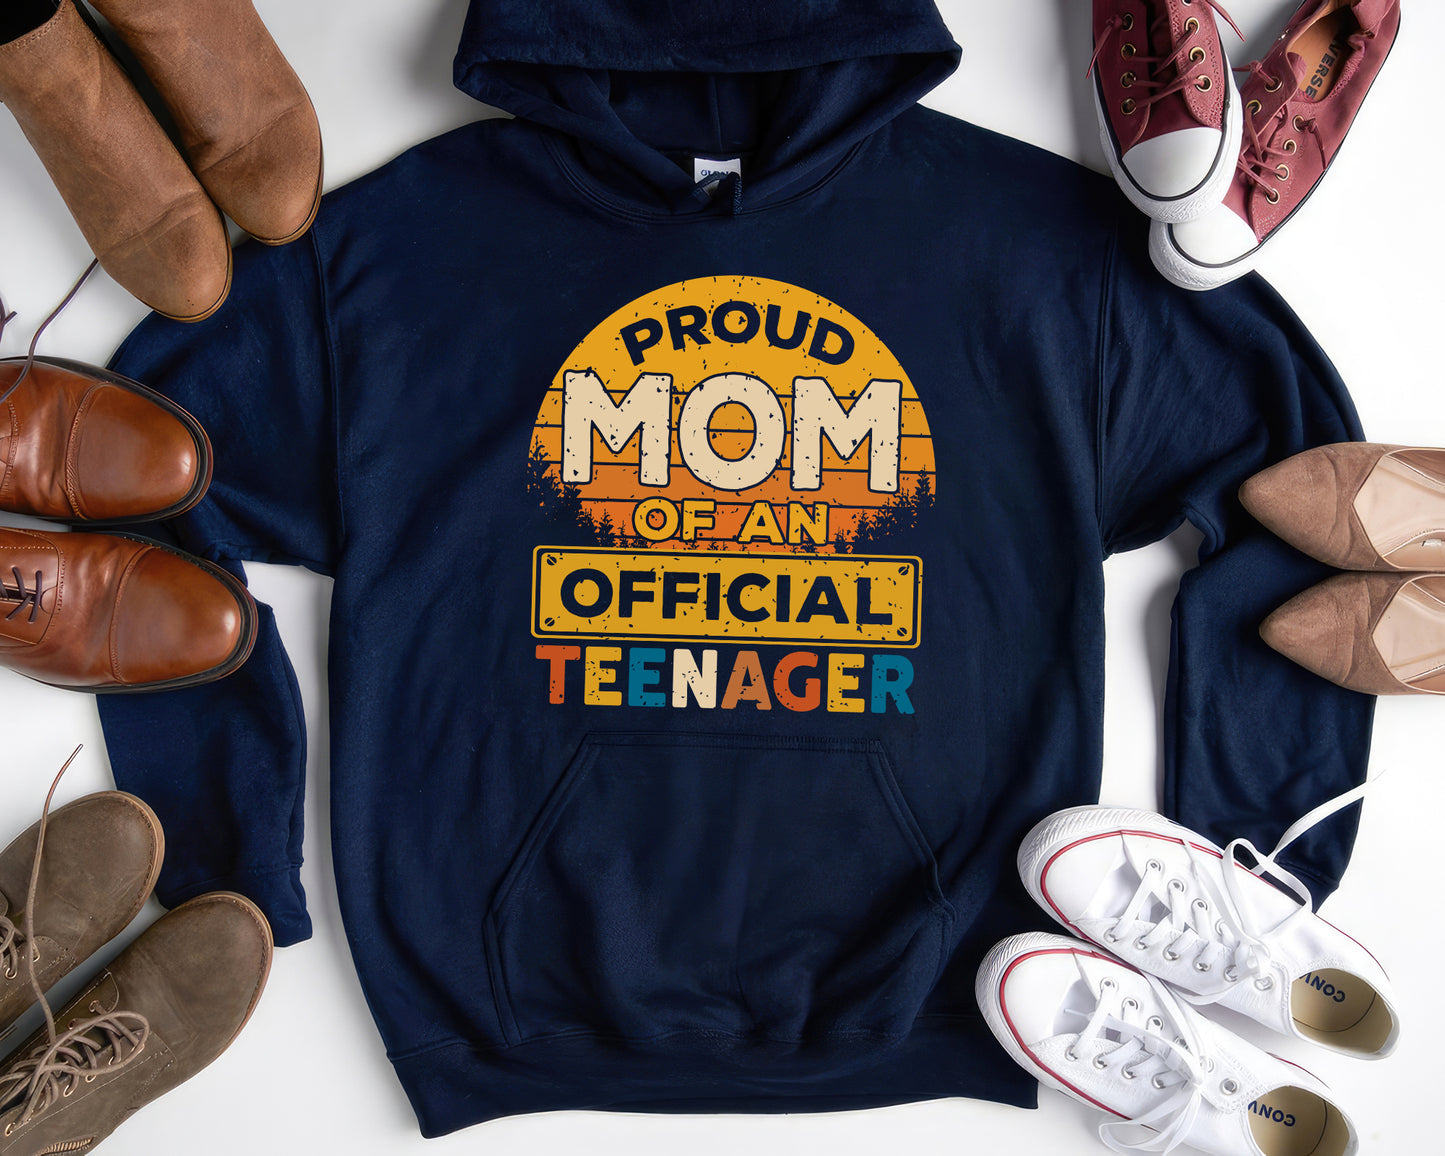 Tee Art Online - Retro Sunset Proud MOM of An Official Teenager Hoodie - Retro Style Hoodie Design | Family Apparel - Navy